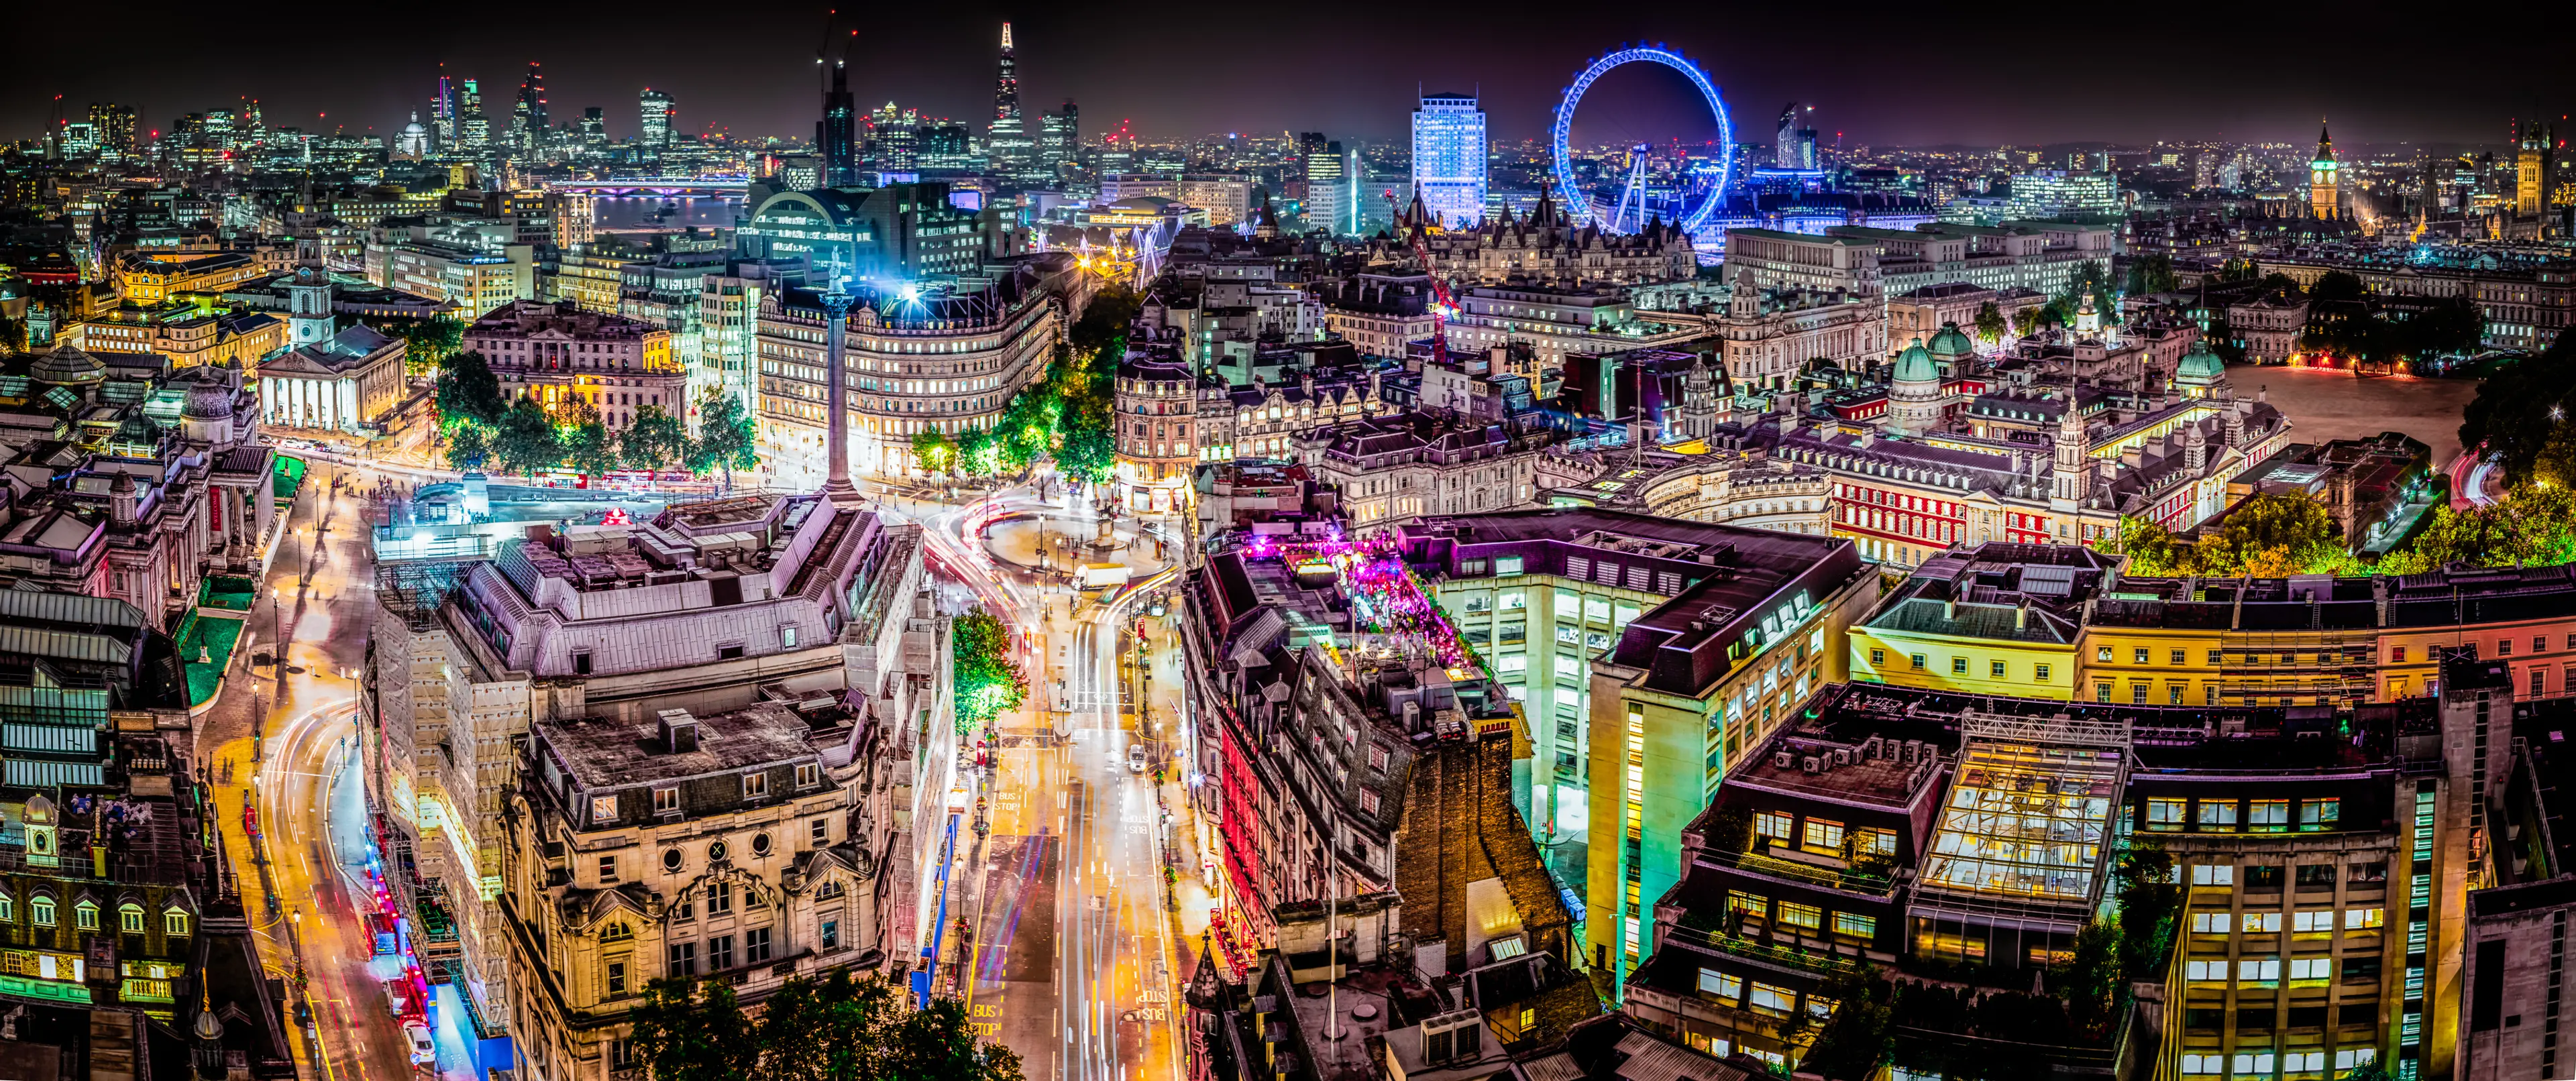 1-Day Offbeat London Adventure: Sightseeing, Shopping & Nightlife with Friends